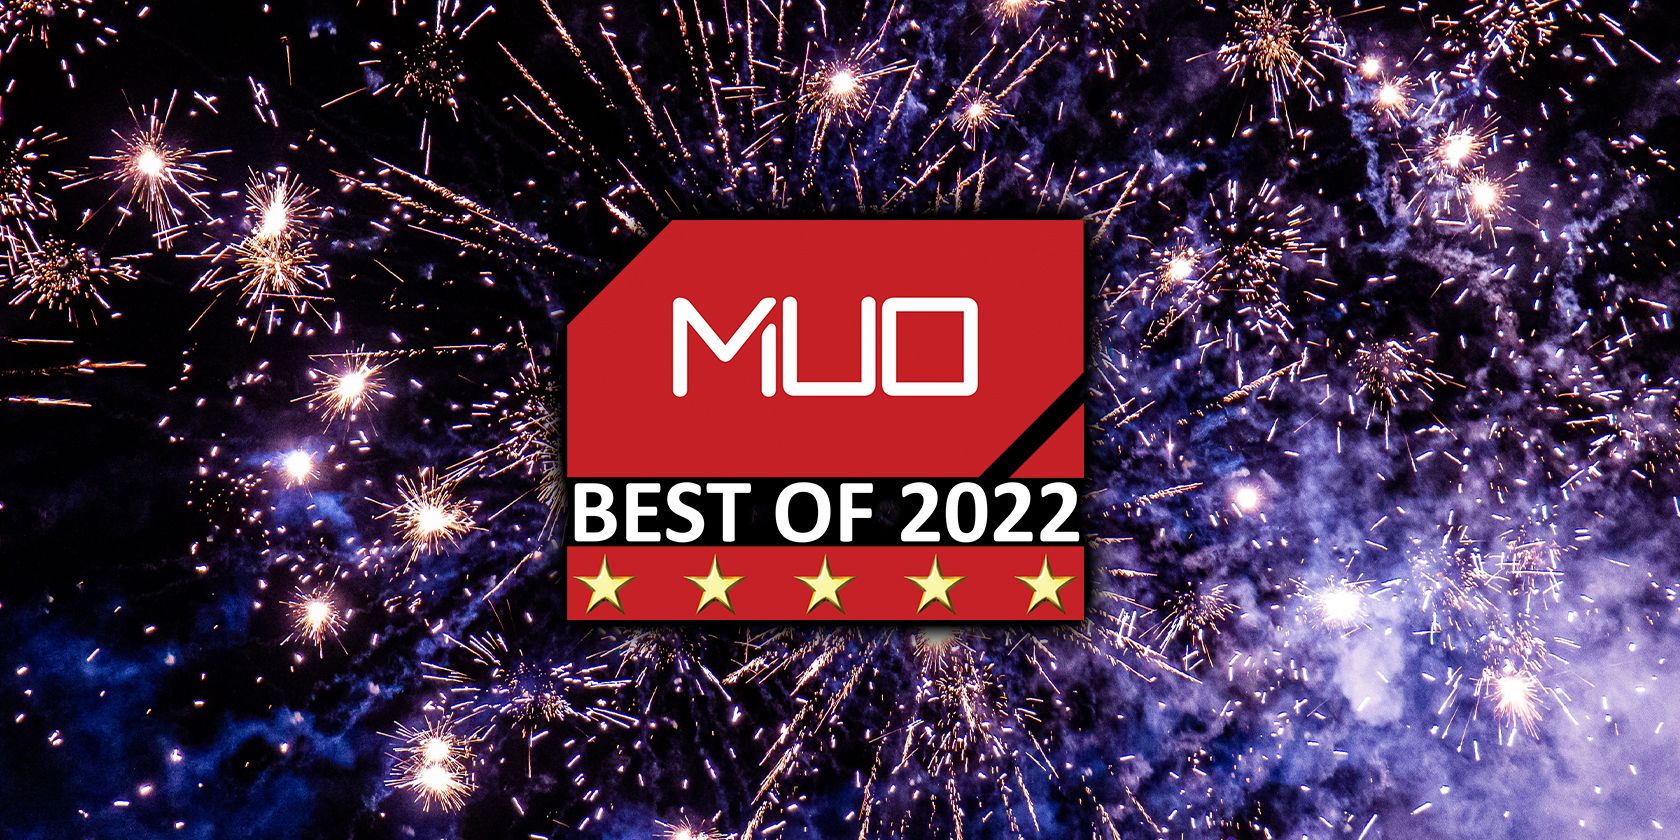 muo best tech of 2022 awards logo with fireworks in background